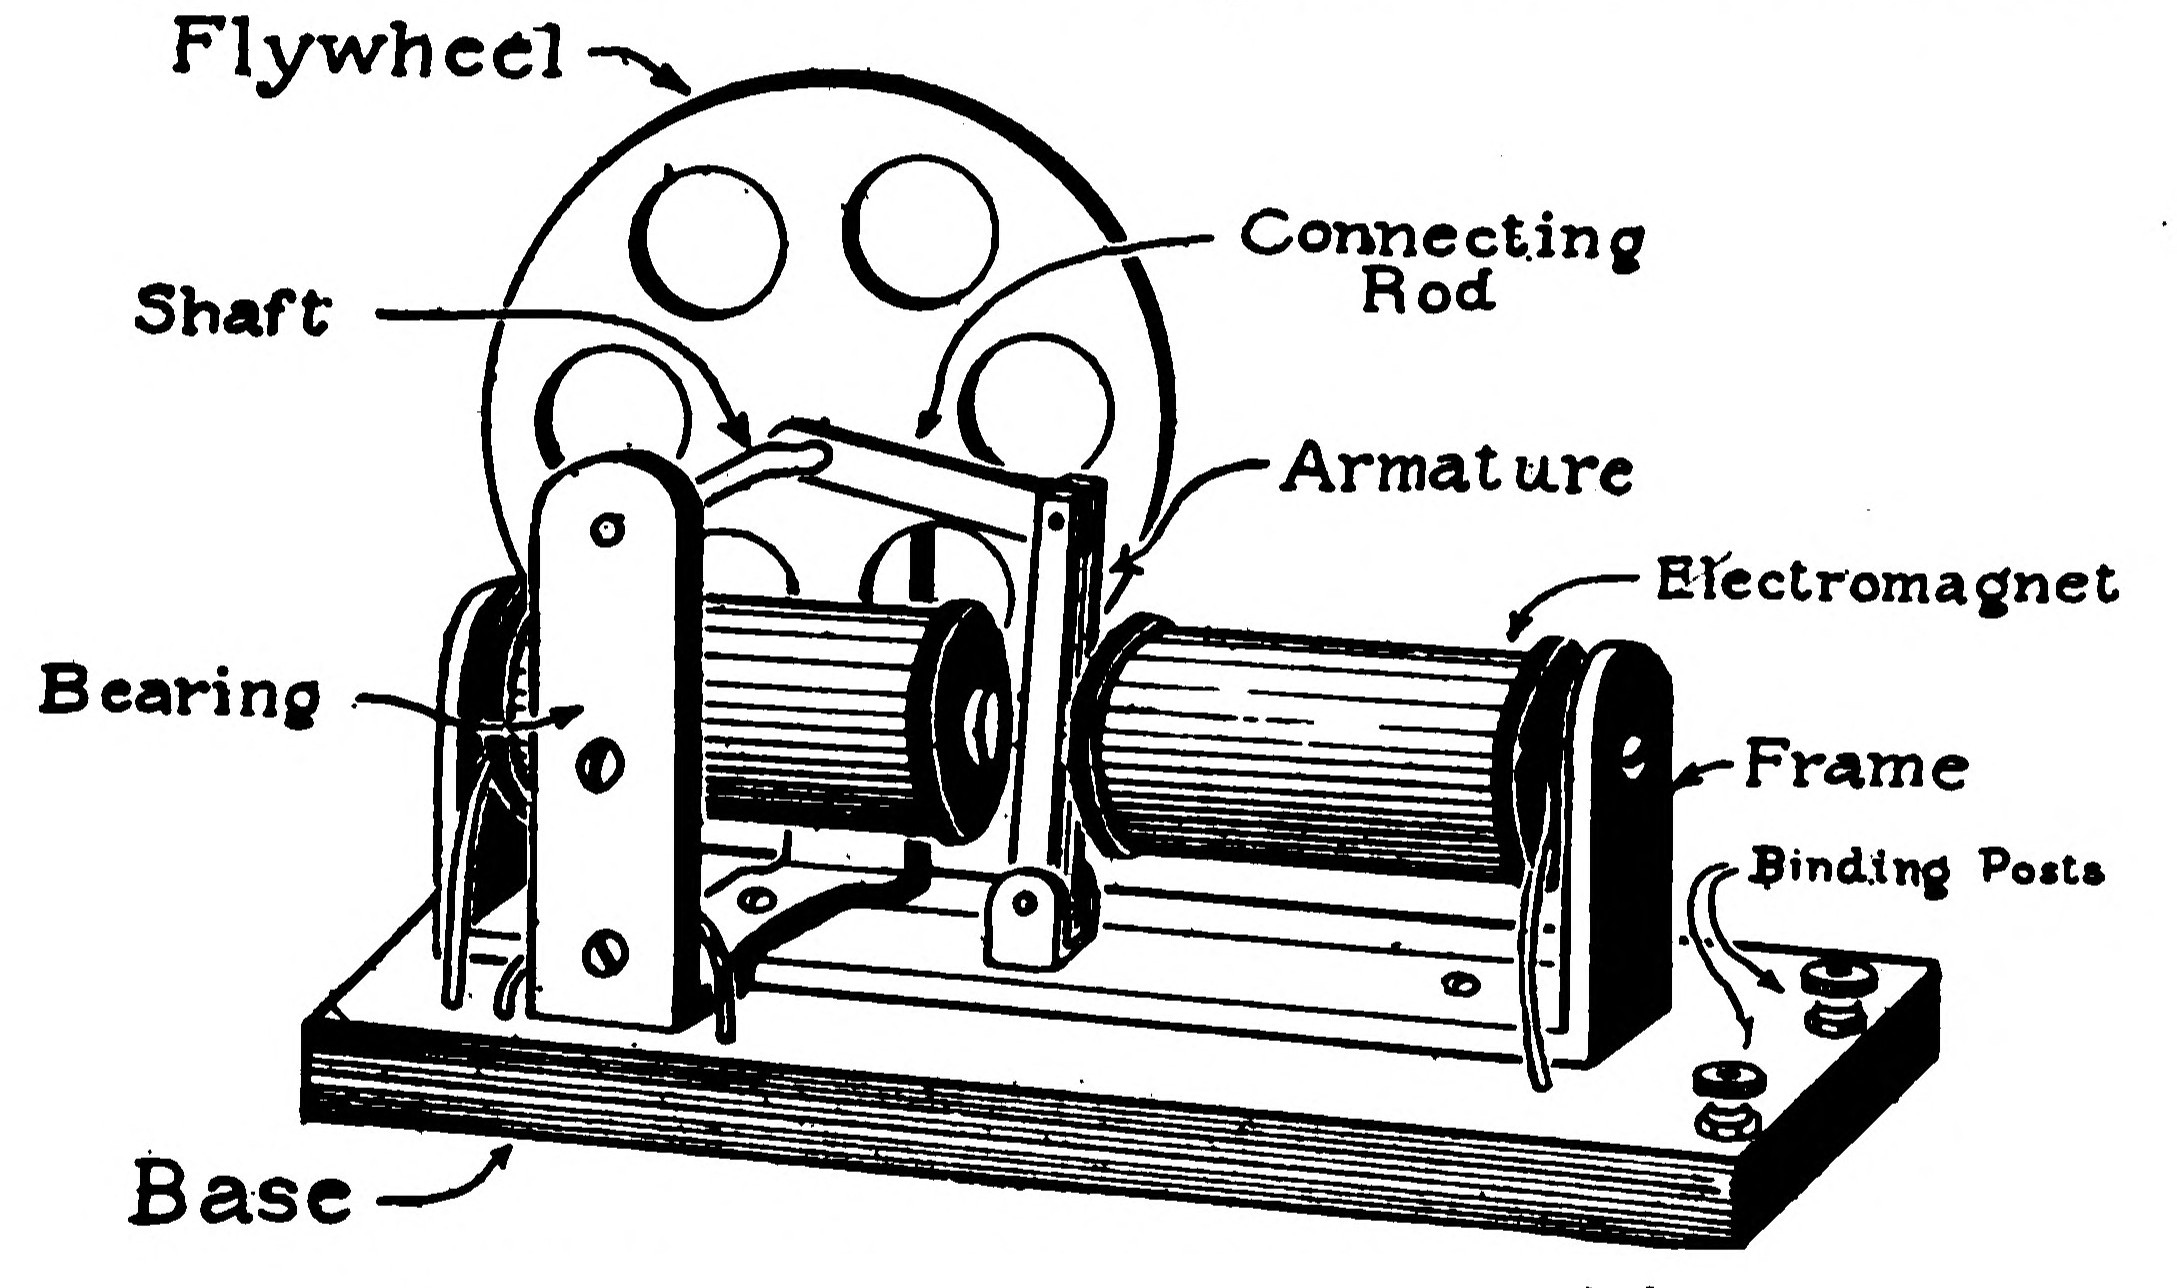 FIG. 143.—Completed Electric Engine.